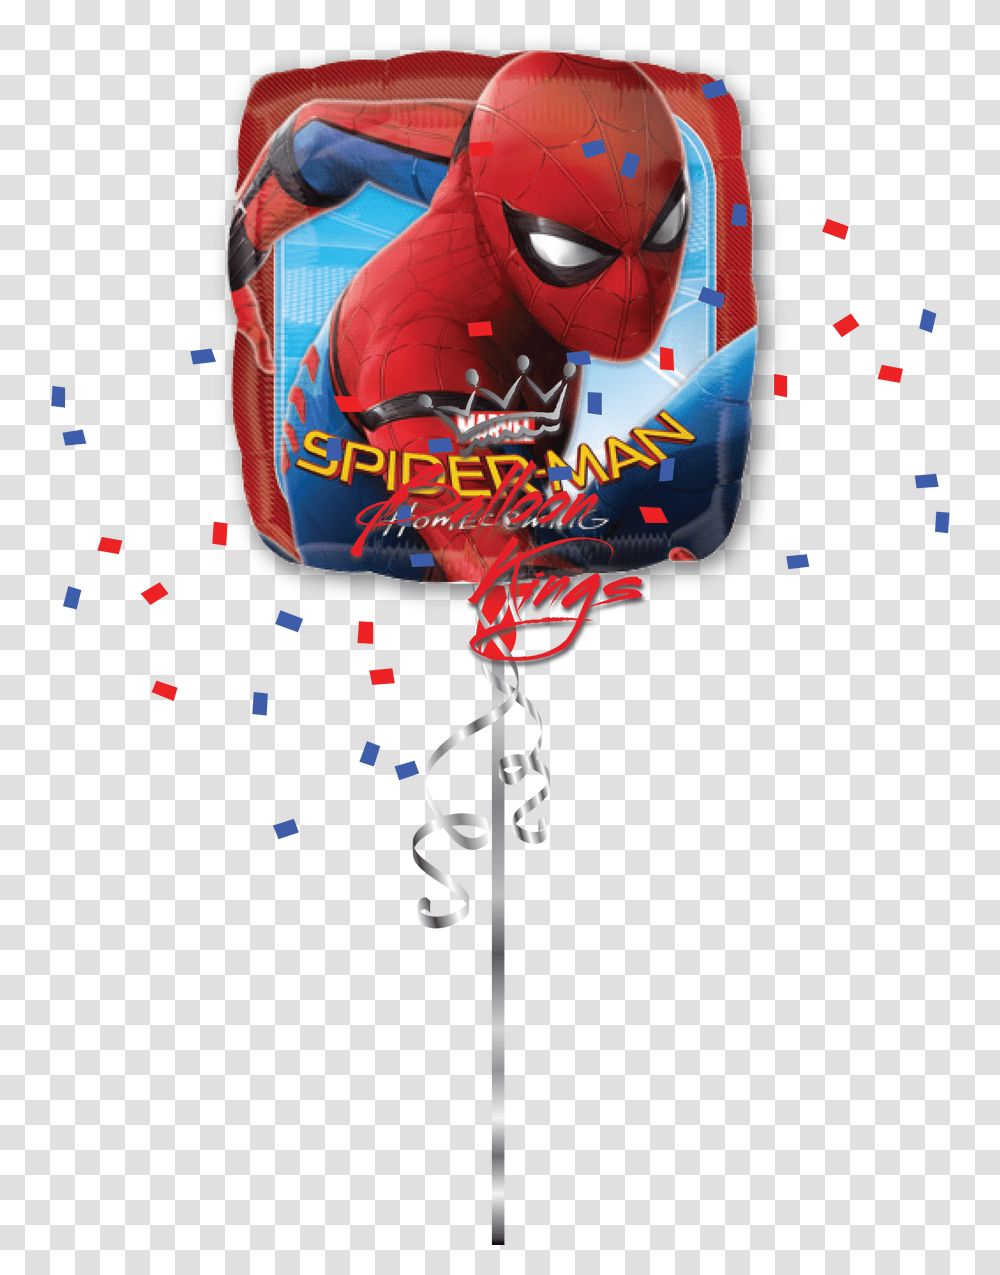 Spiderman Spiderman Balloons Birthday, Paper, Inflatable, Confetti Transparent Png